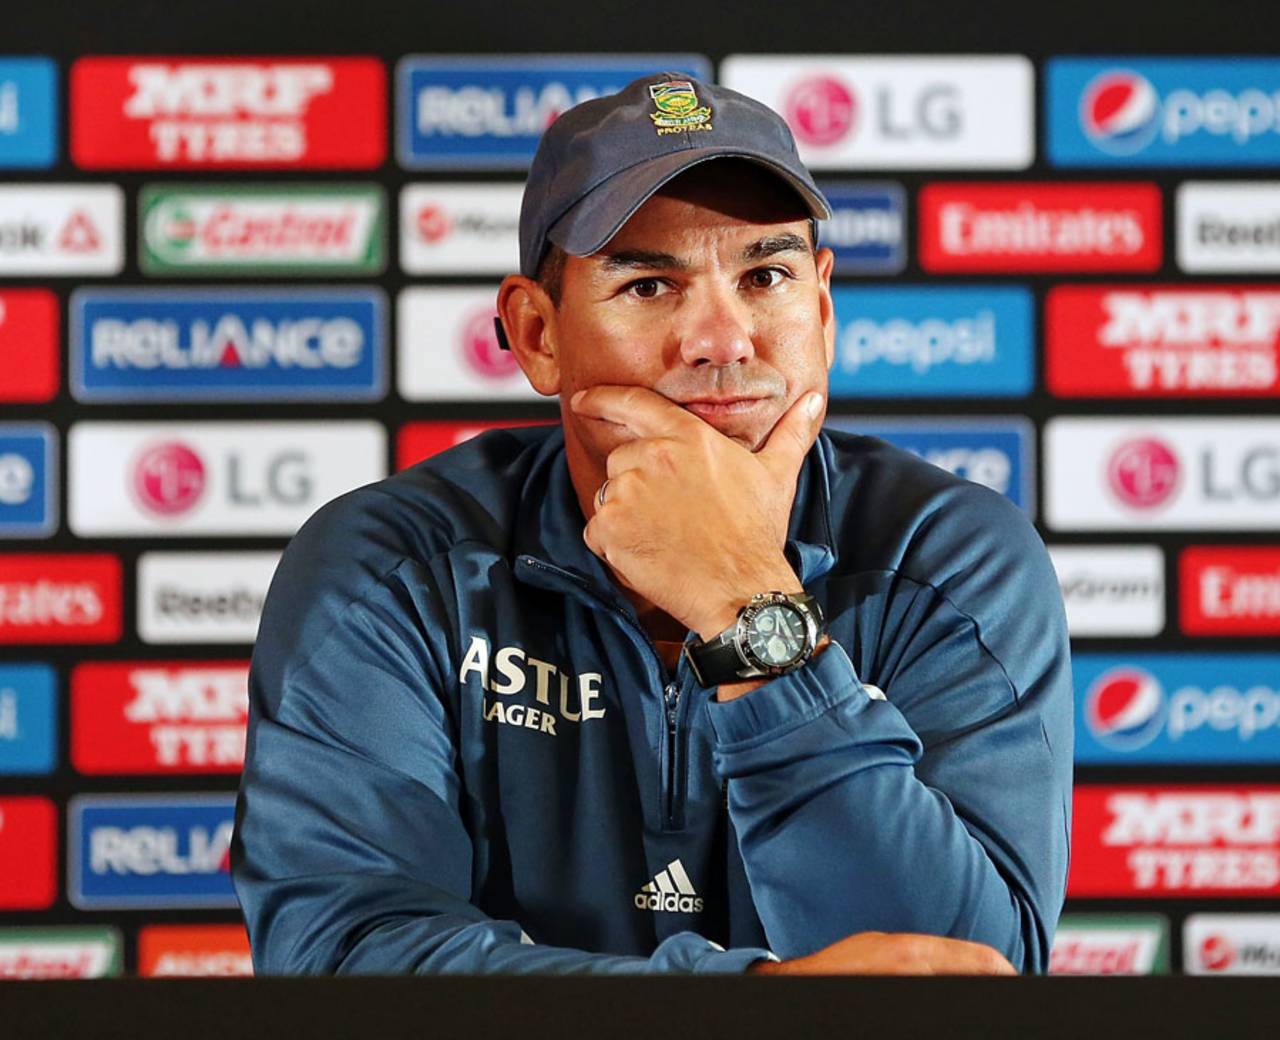 Whether Domingo is given an extension or not, the timing of the announcement is a problem already&nbsp;&nbsp;&bull;&nbsp;&nbsp;International Cricket Council